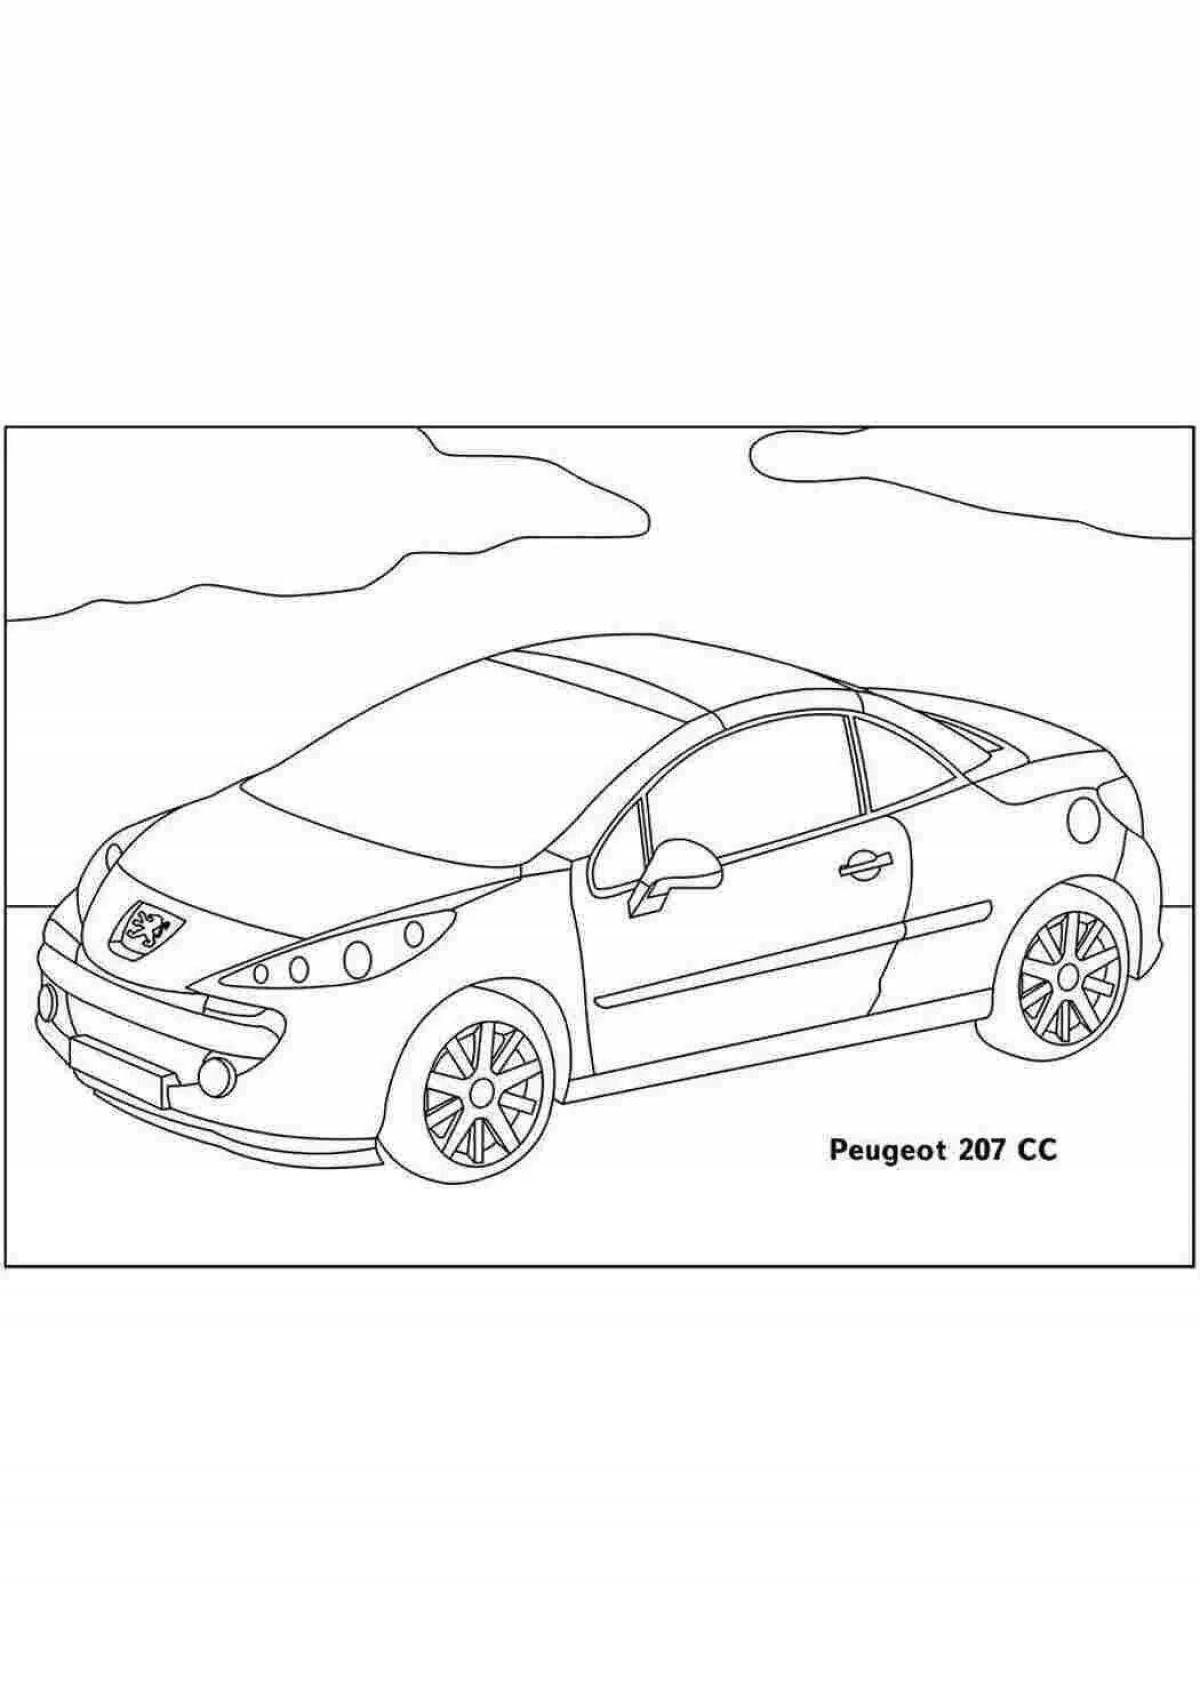 Attractive coloring of peugeot cars